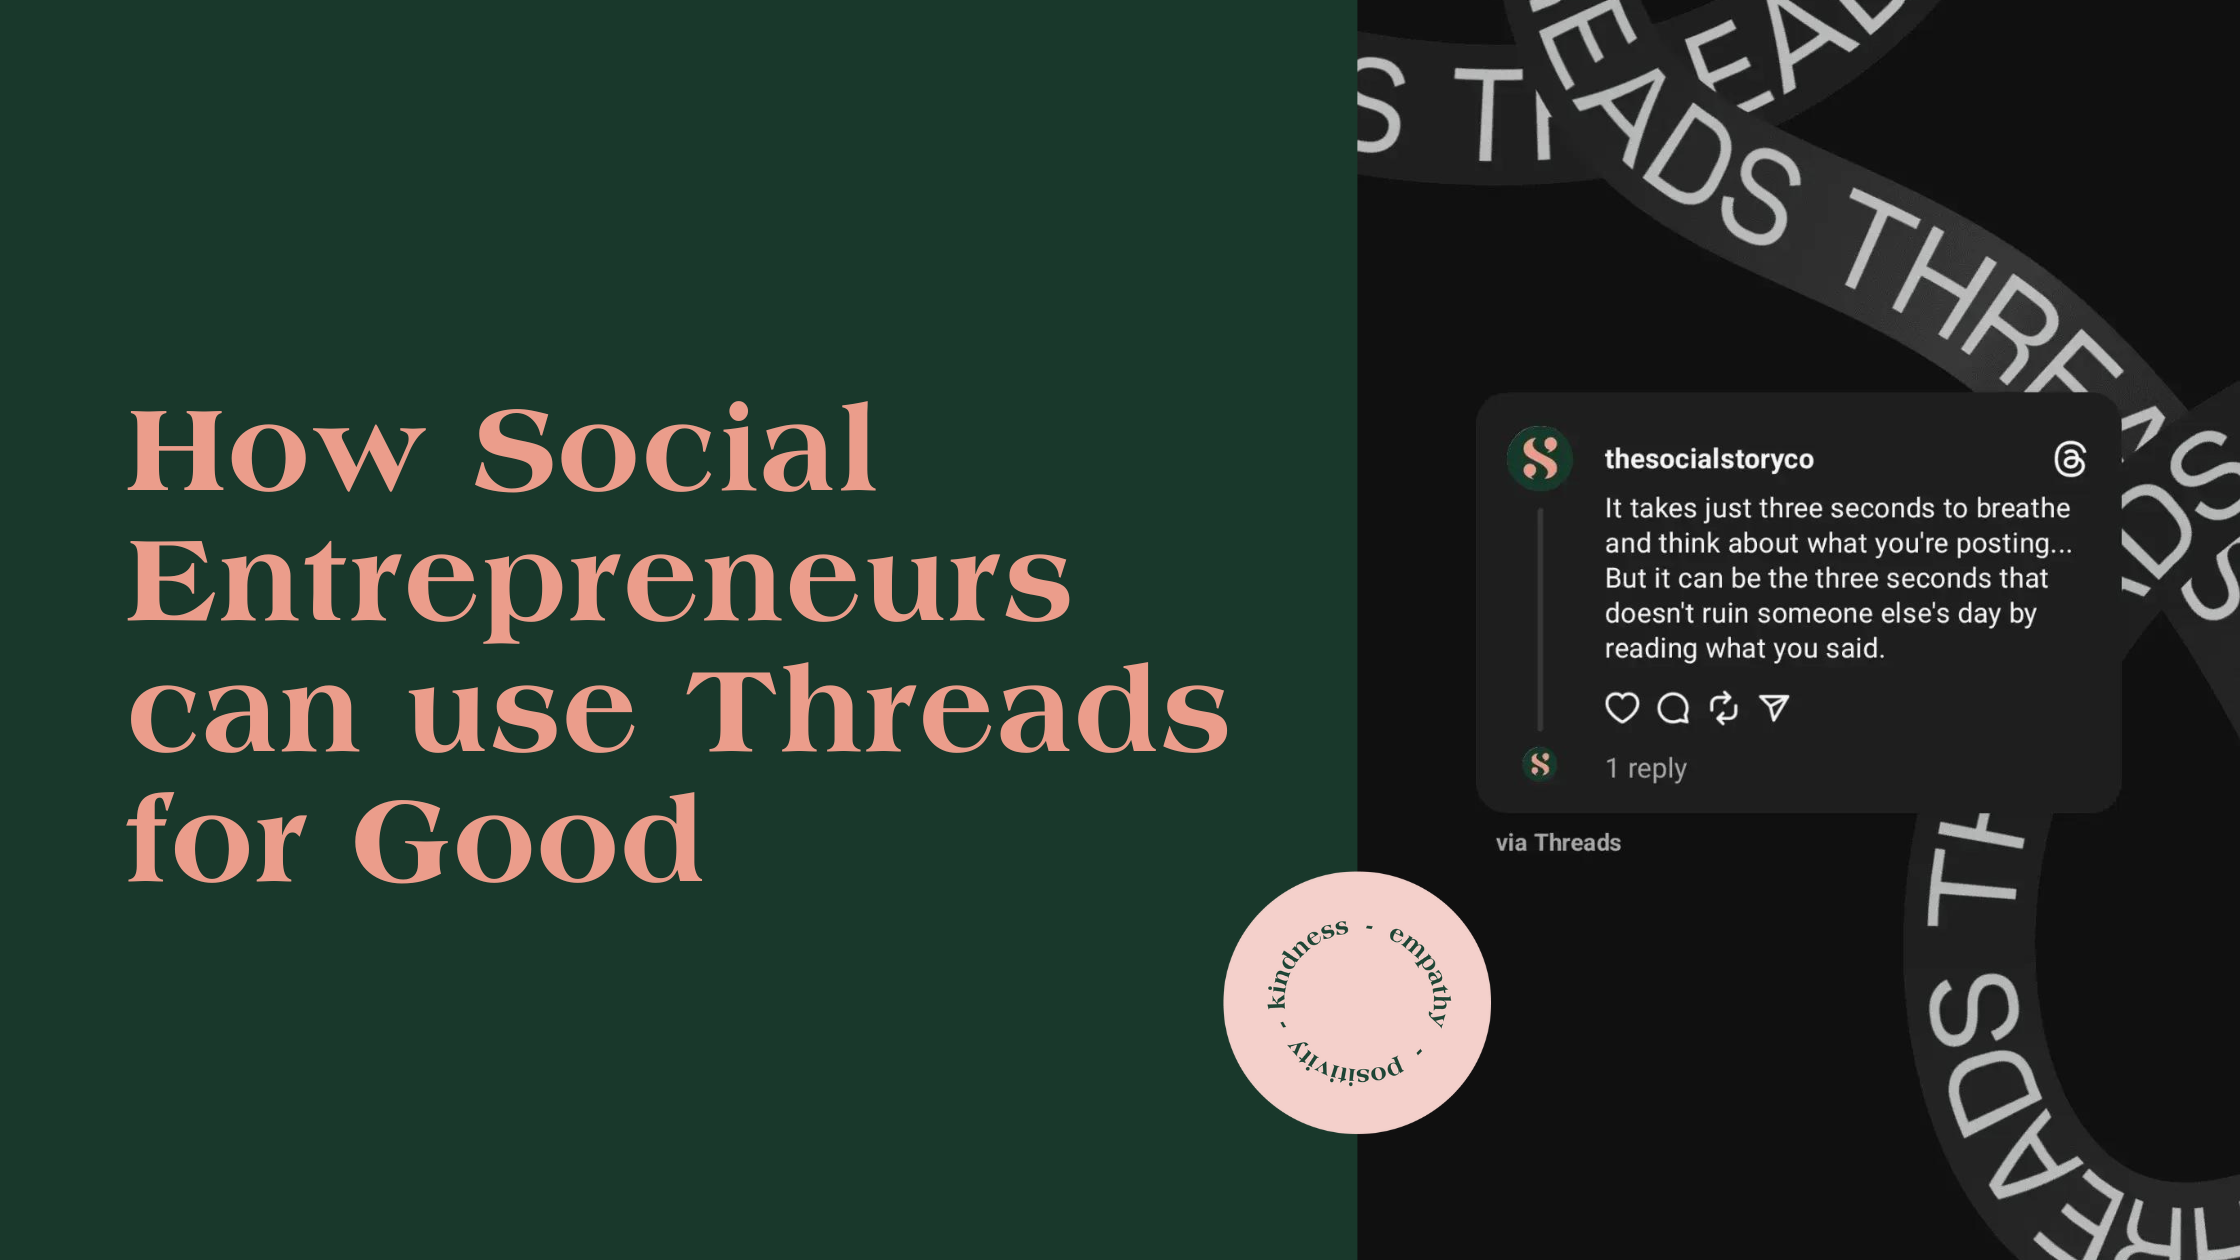 How Social Entrepreneurs can use Threads for Good heading with a share of a thread on the right